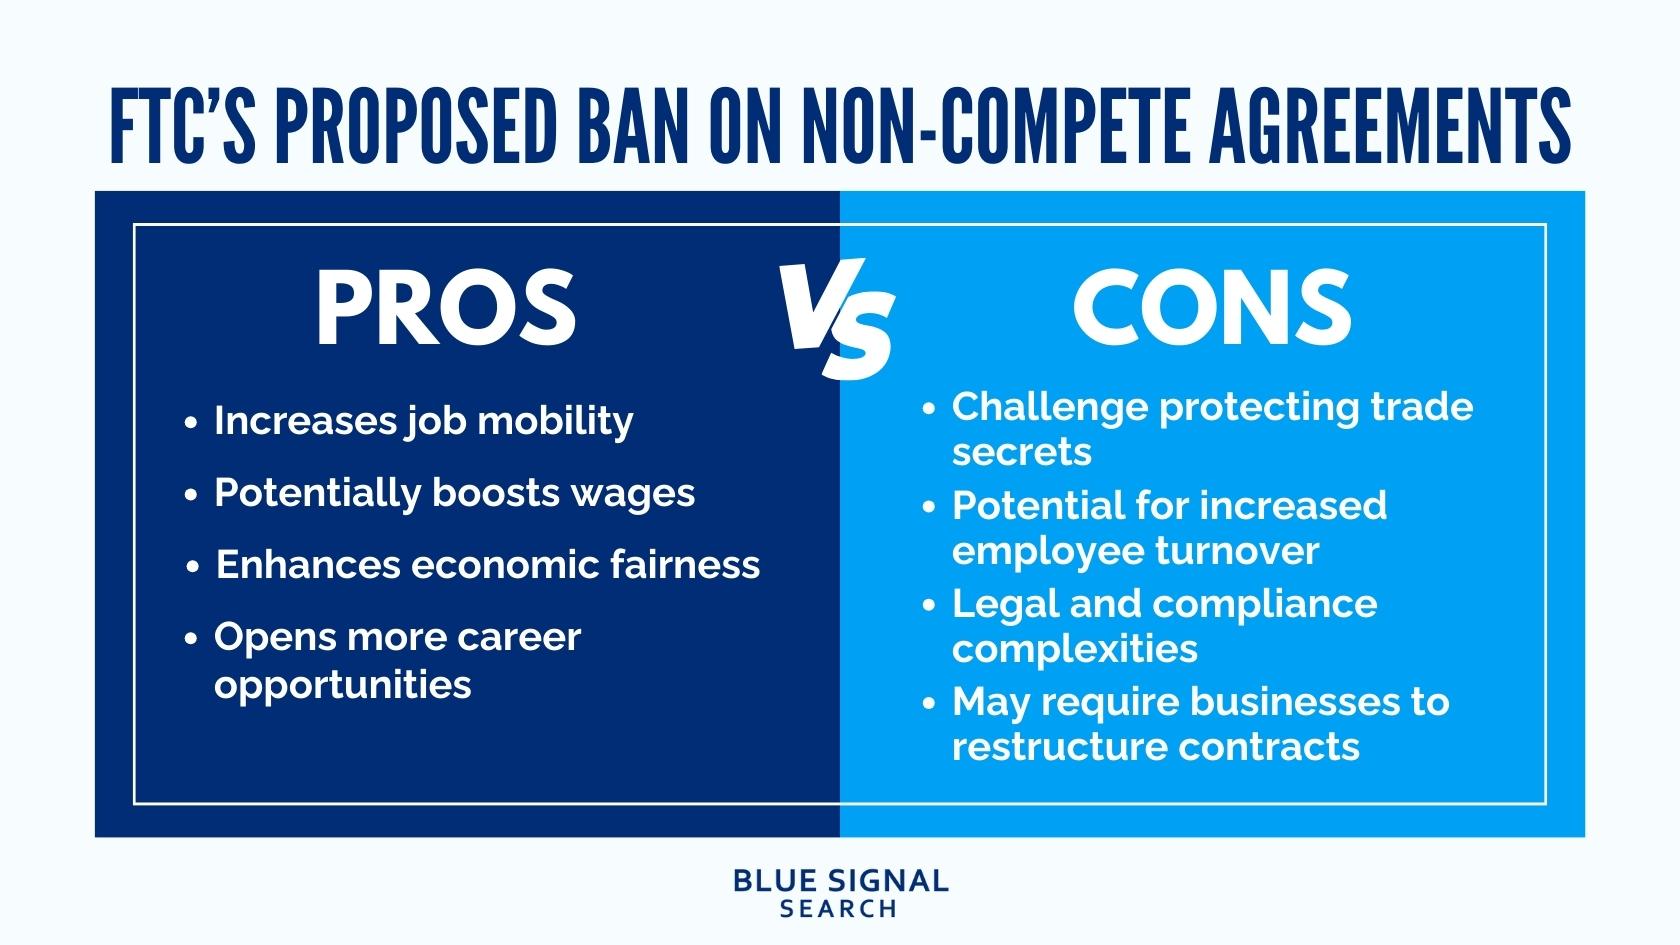 FTC’s Proposed Ban on Non-Compete Agreements: Pros and Cons